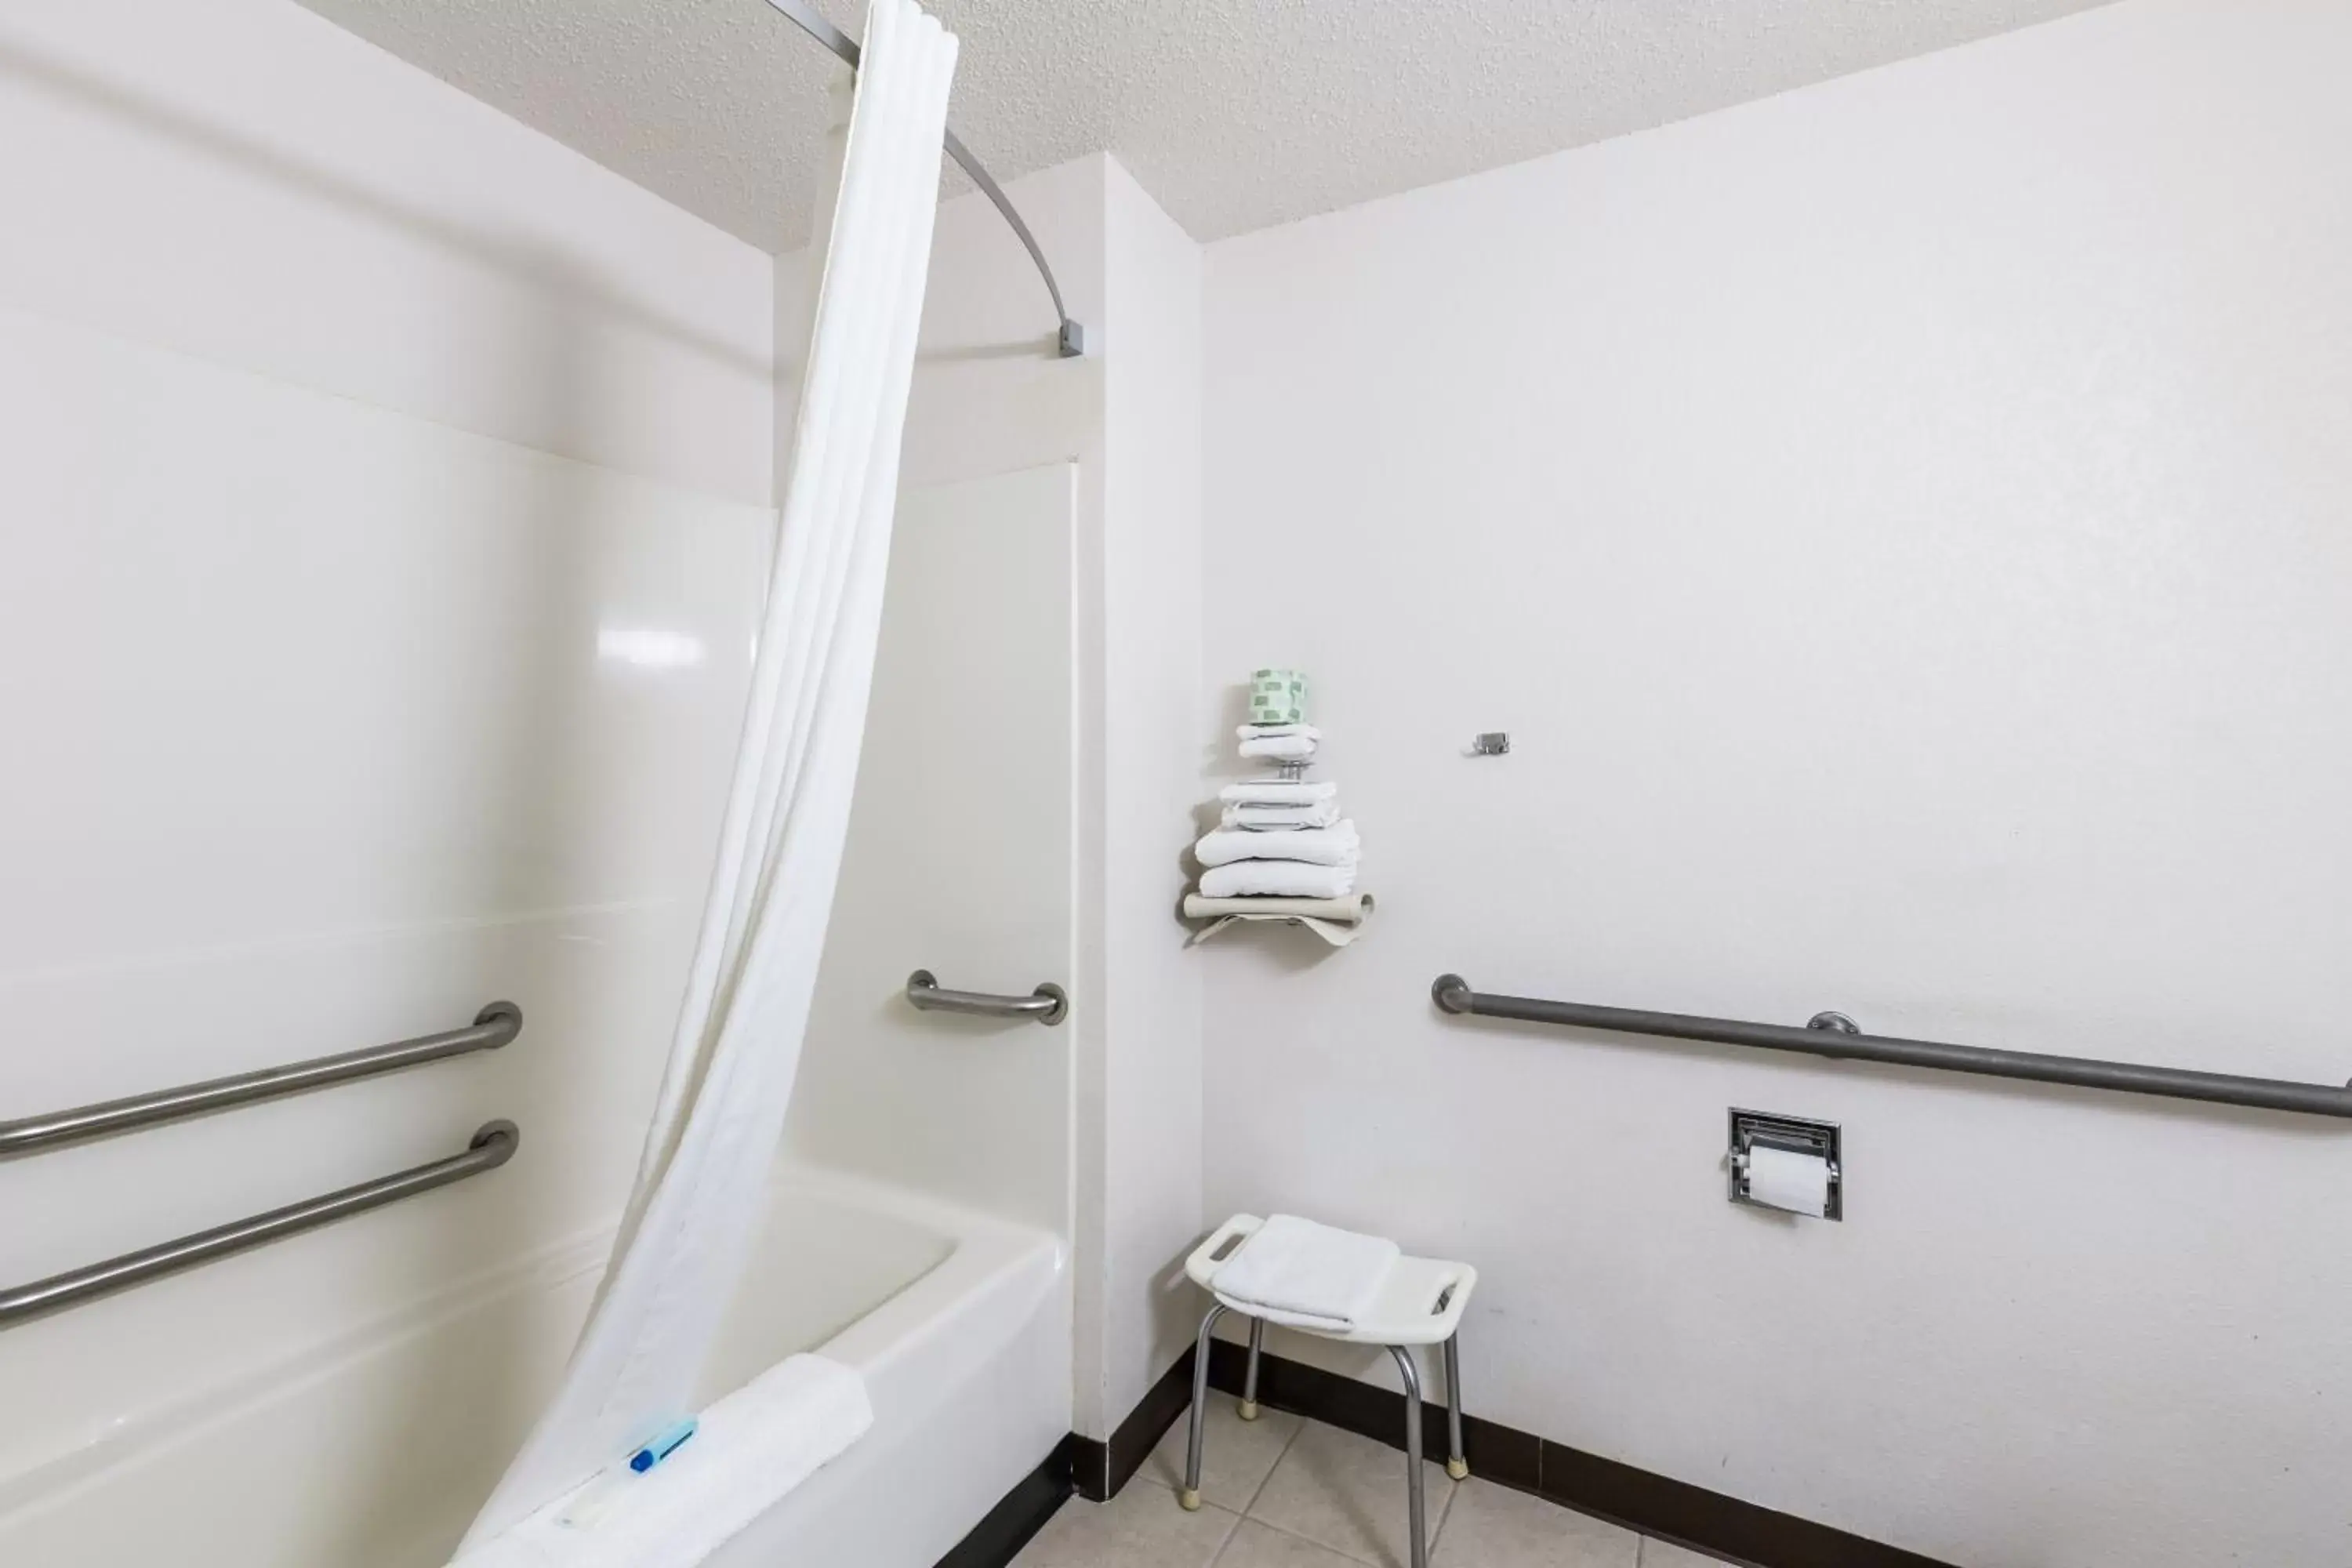 Facility for disabled guests, Bathroom in Americas Best Value Inn Charlotte